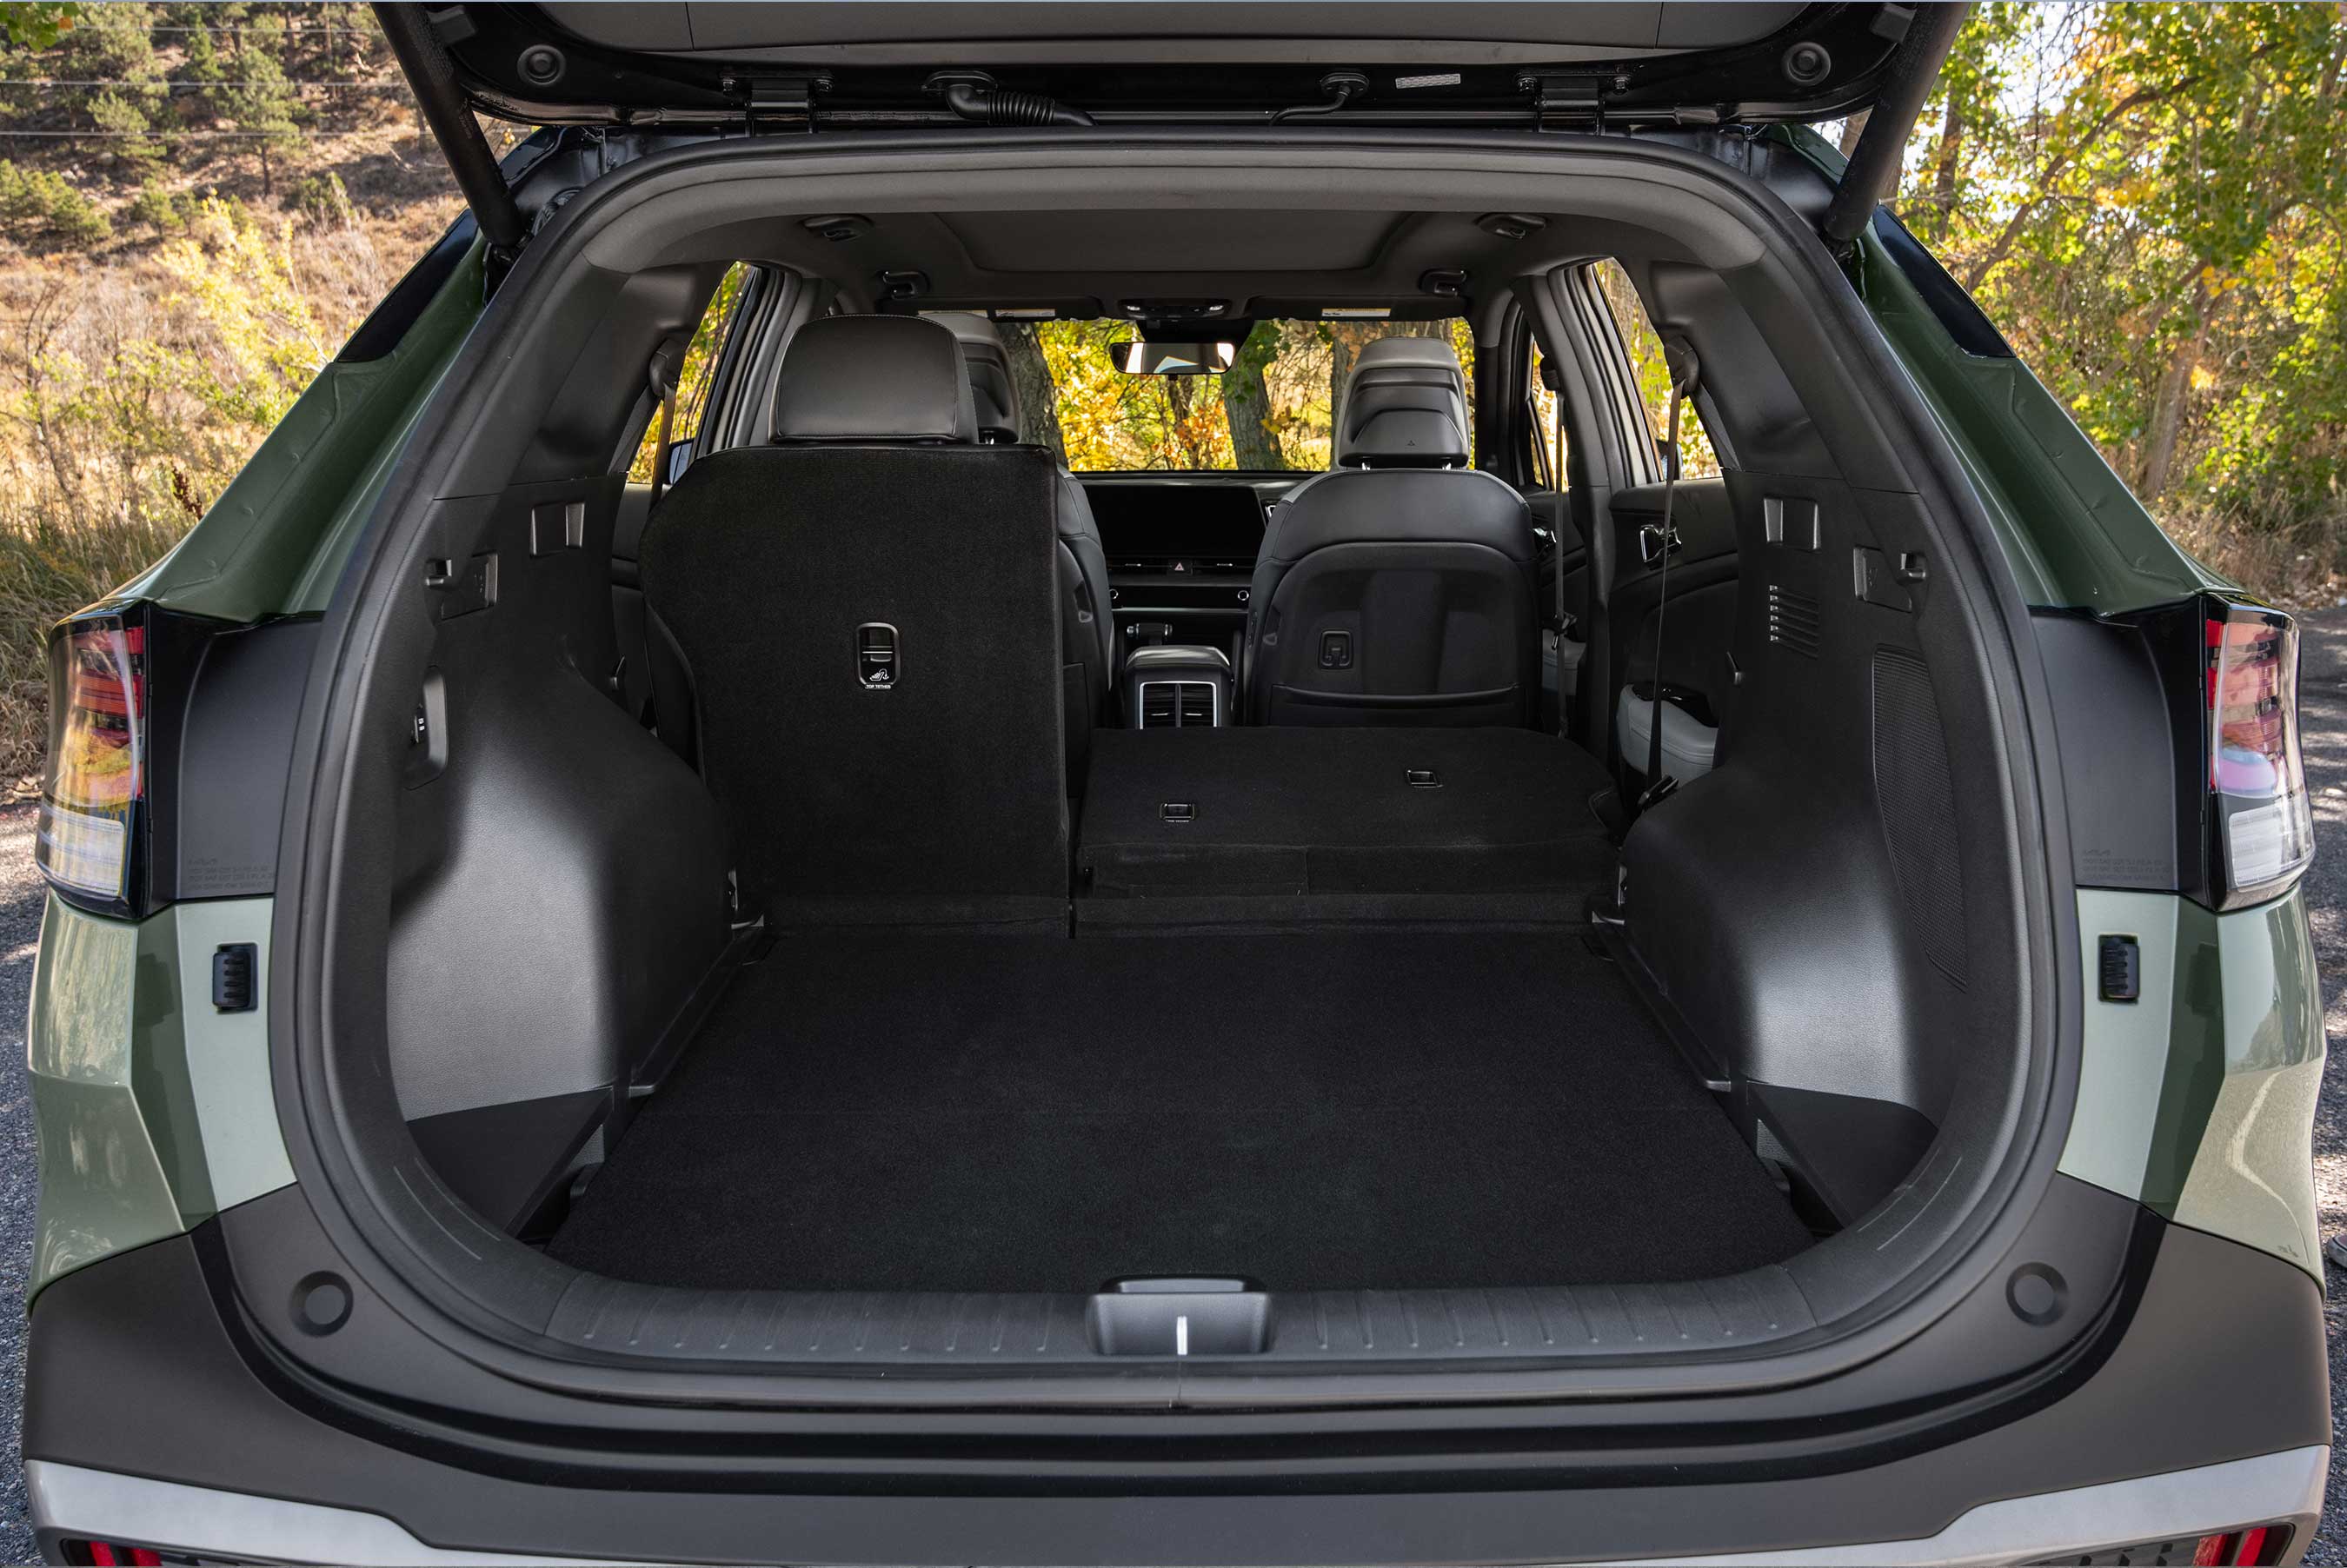 The all-new 2023 Sportage SUV is larger in several dimensions compared to the previous generation, with best-in-class rear seat legroom and rear cargo capacity that’s the largest in the segment.